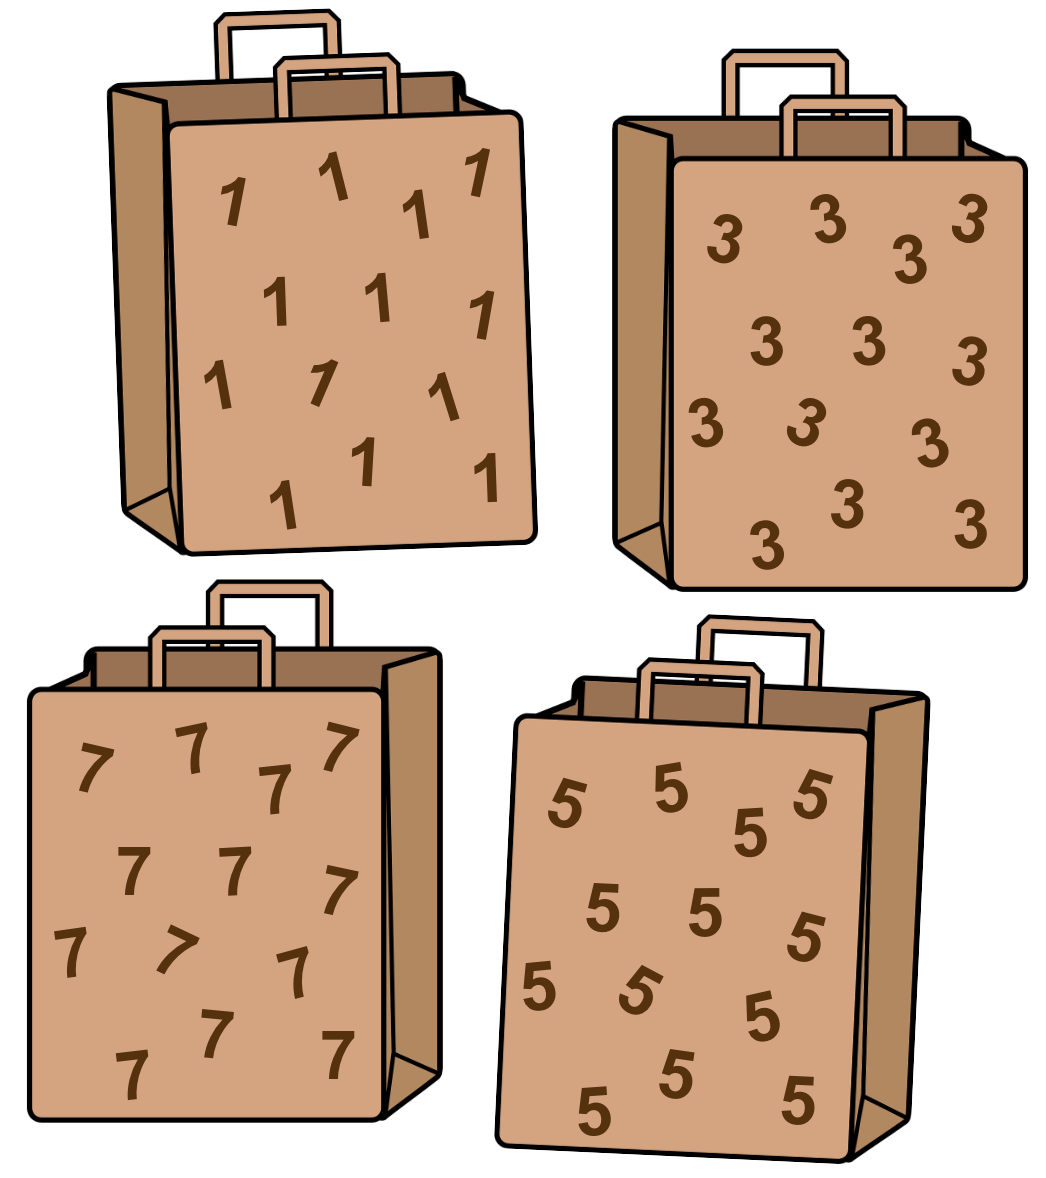 An image of four paper bags. Each has one number (1,3,5,7) appearing on it 13 times. 